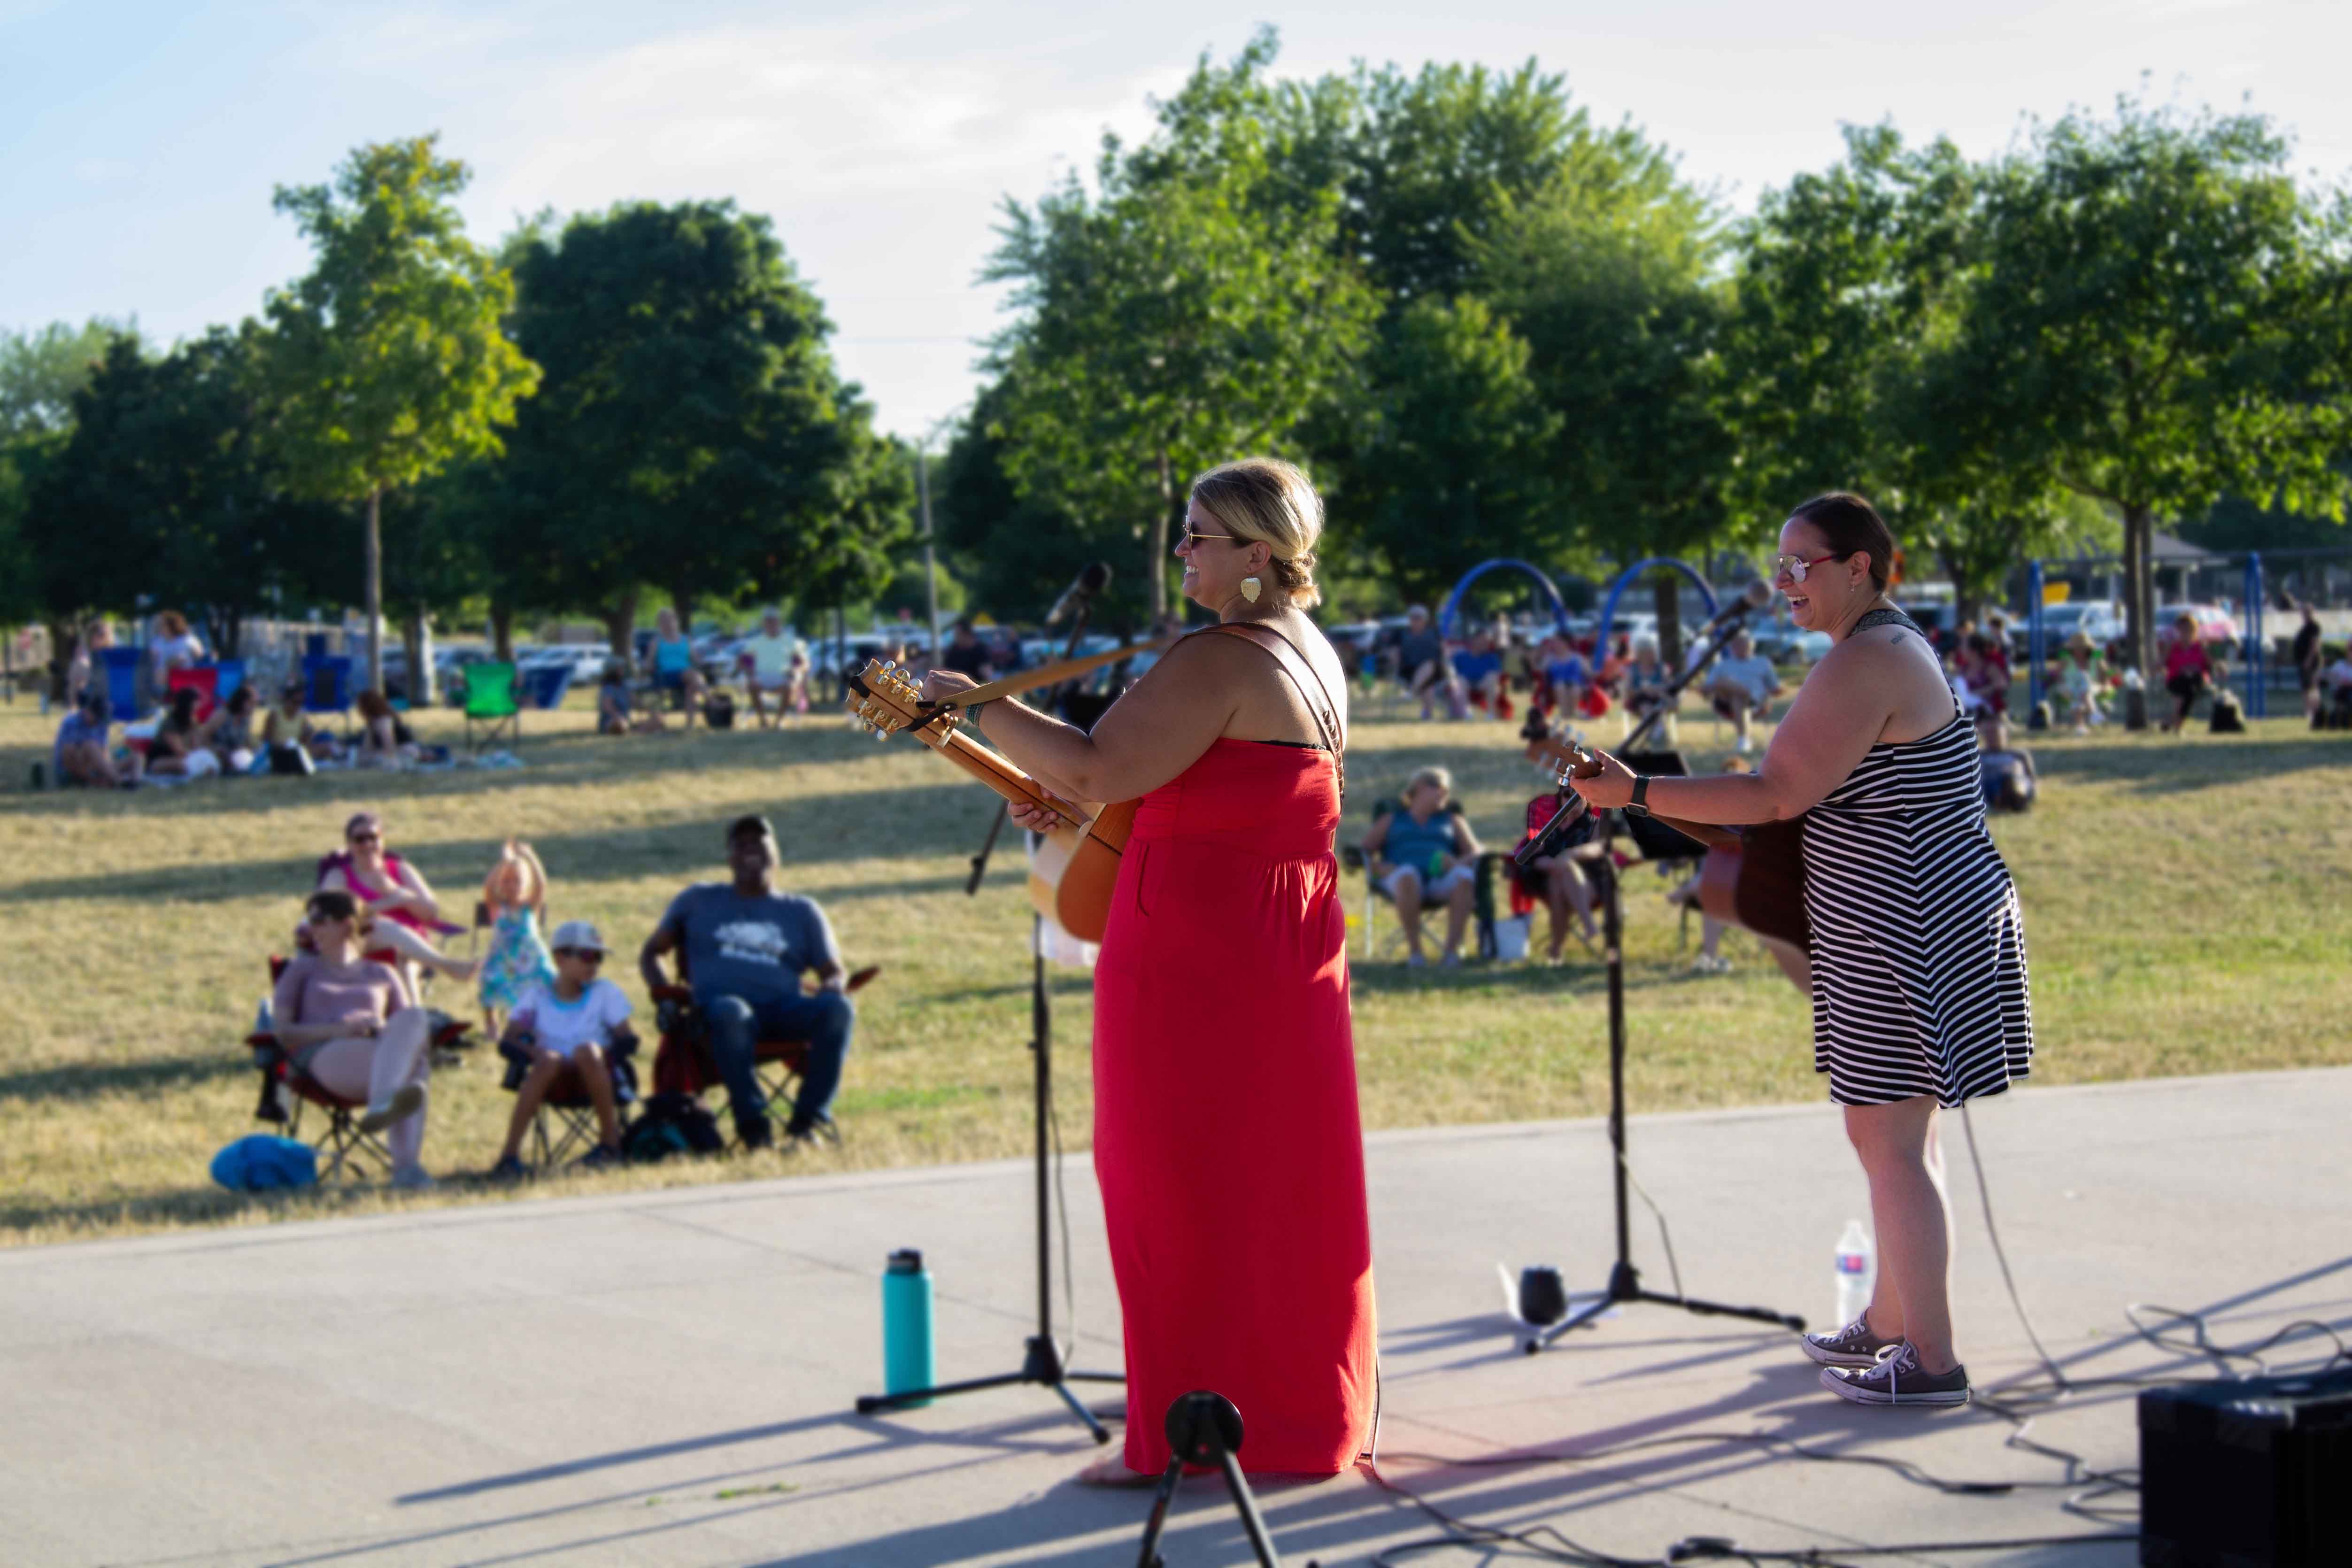 Photo of two people playing guitar and singing in front of a crowd of people sitting on the grass in a park.